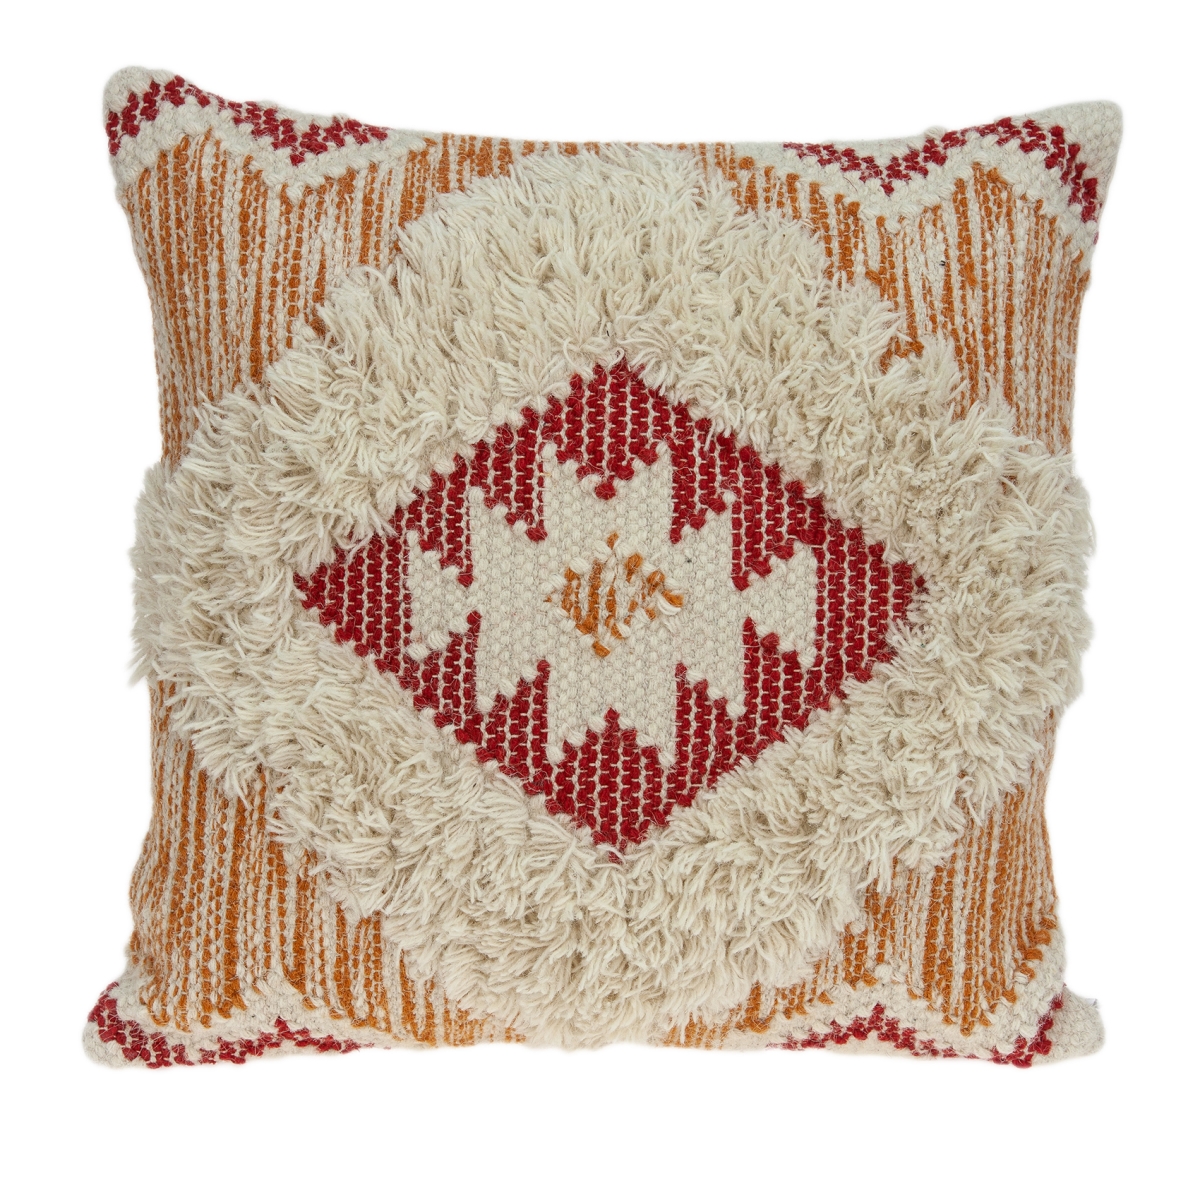 Pild11129p Zara Beige, Orange & Red Square Bohemian Pillow Cover With Poly Insert - 20 X 20 X 7 In.